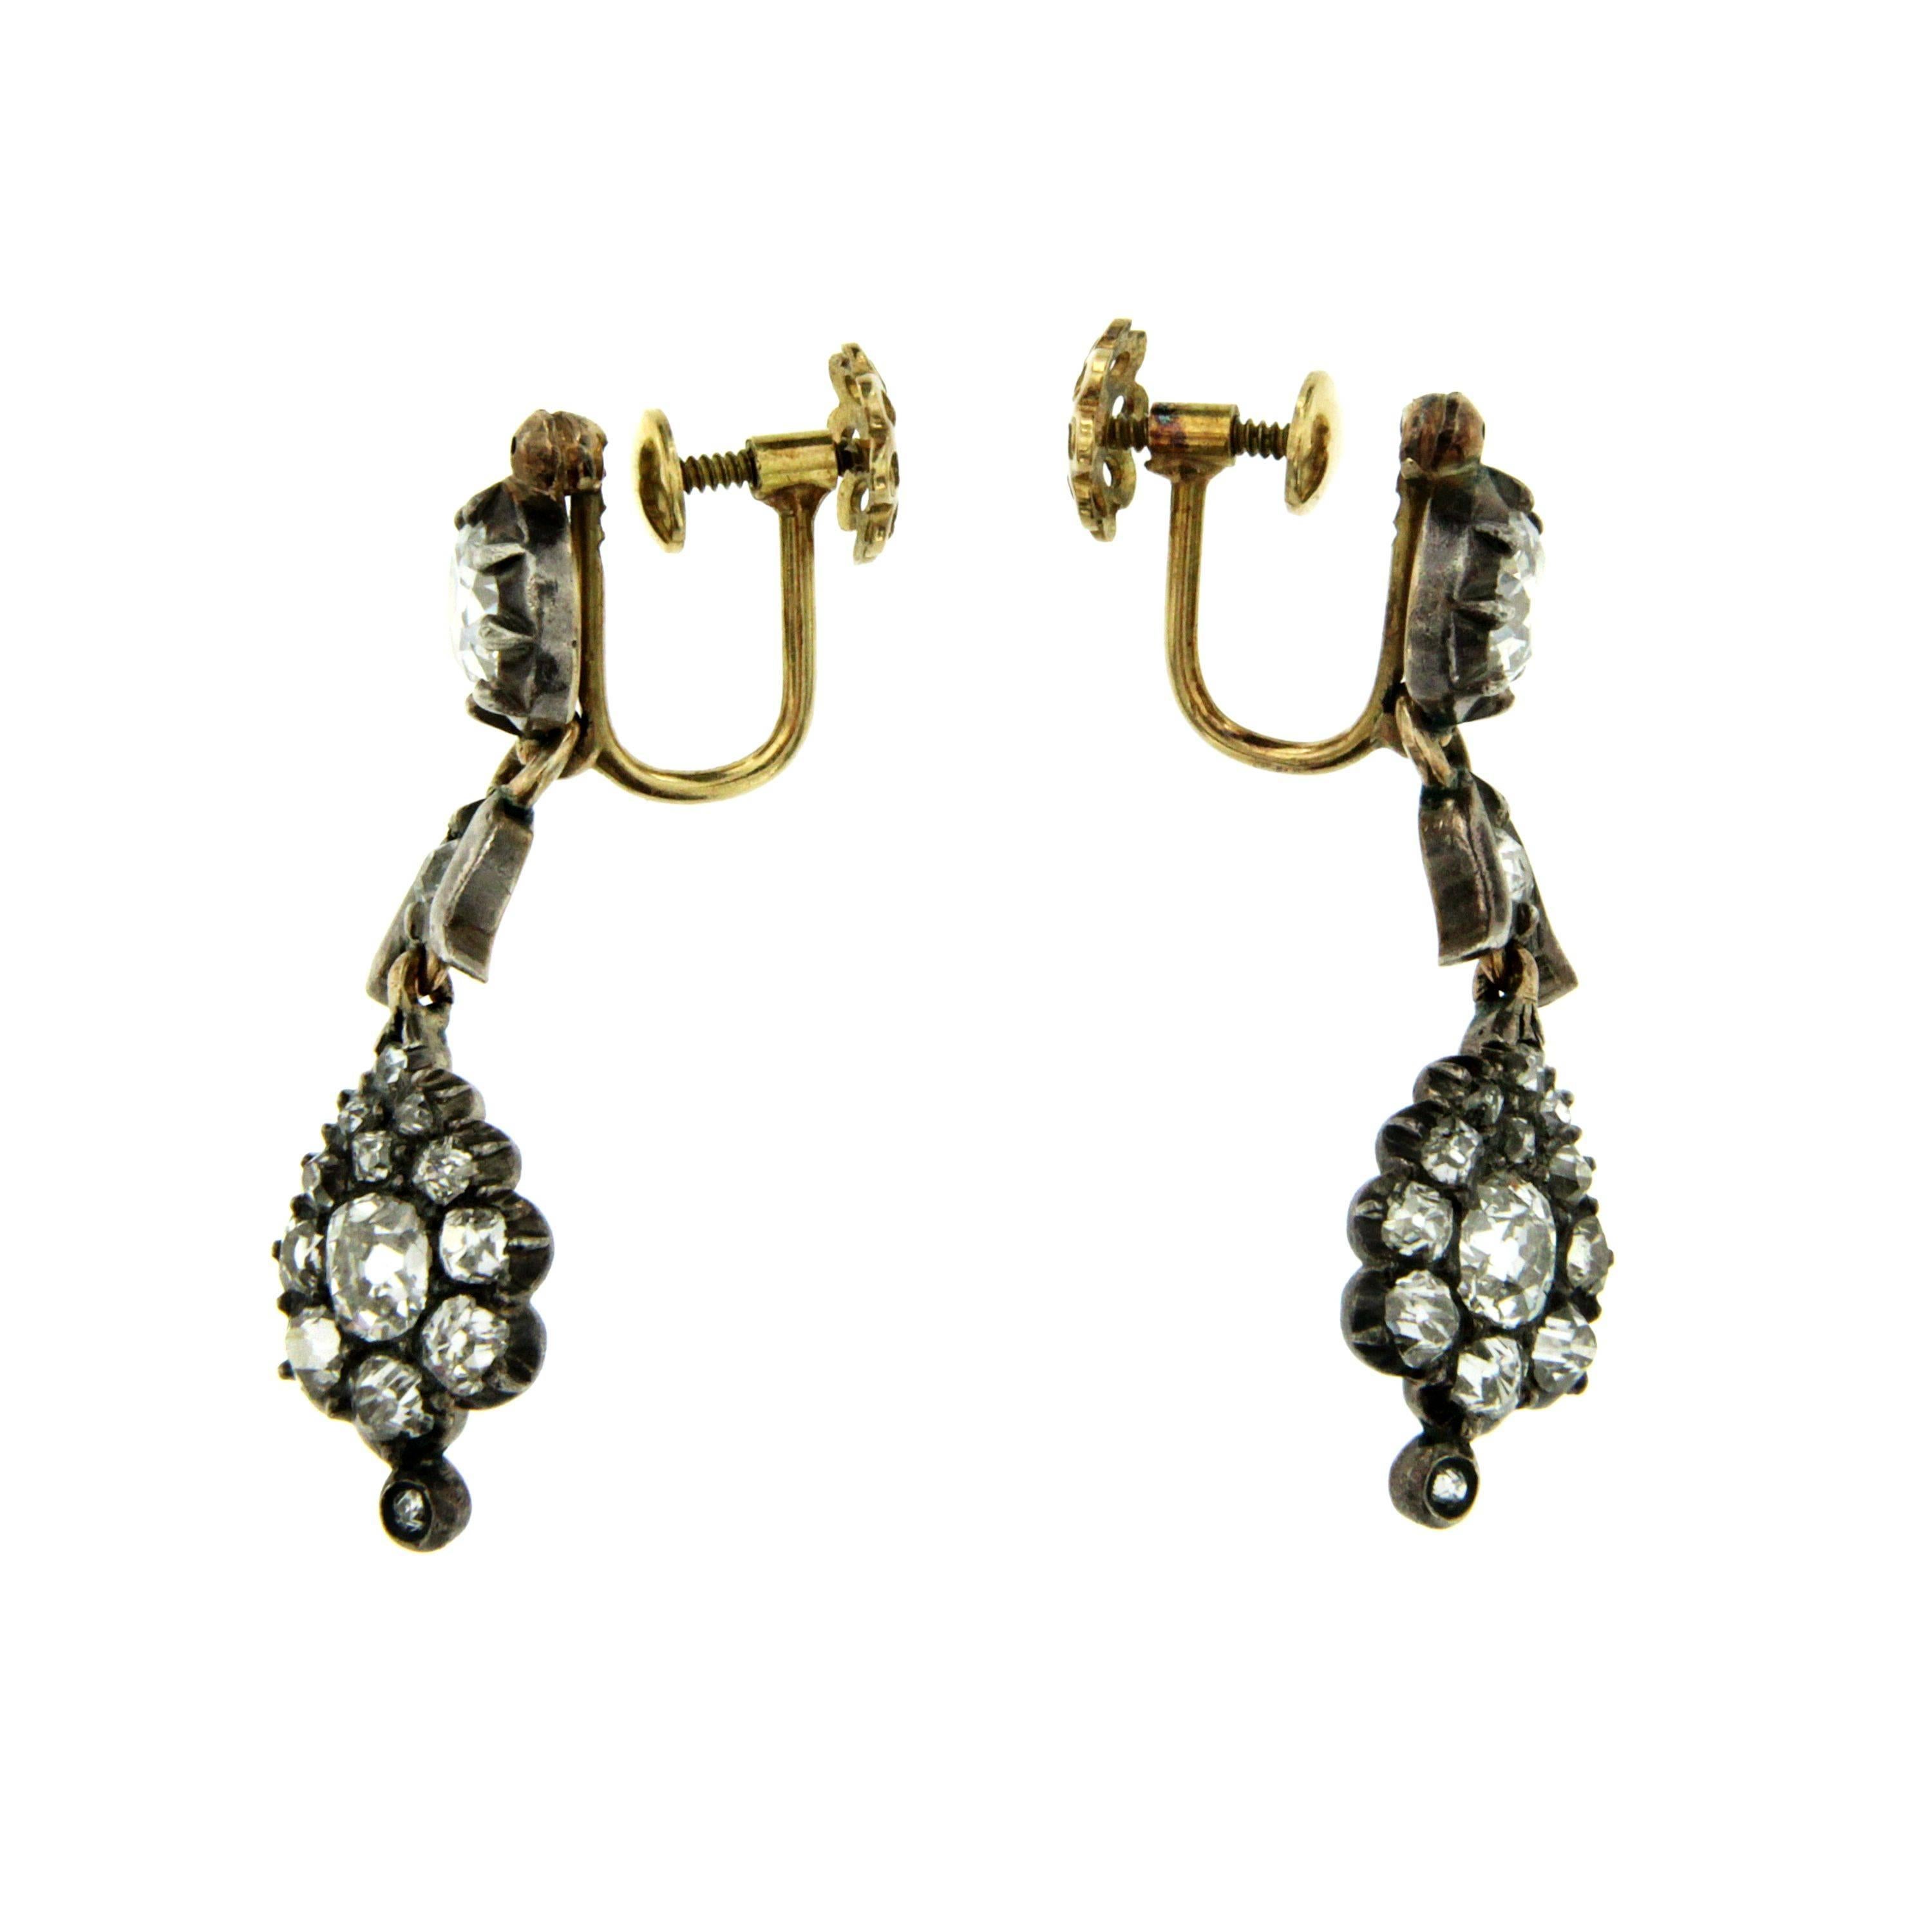 These Victorian earrings are set with 3.0 carat of sparkling old mine cut Diamonds H color,  approximately 1.29" in length (3.3 cm). Screw back closure.
Tested 12k yellow gold and silver, Entirely hand crafted English, circa 1890.

CONDITION: